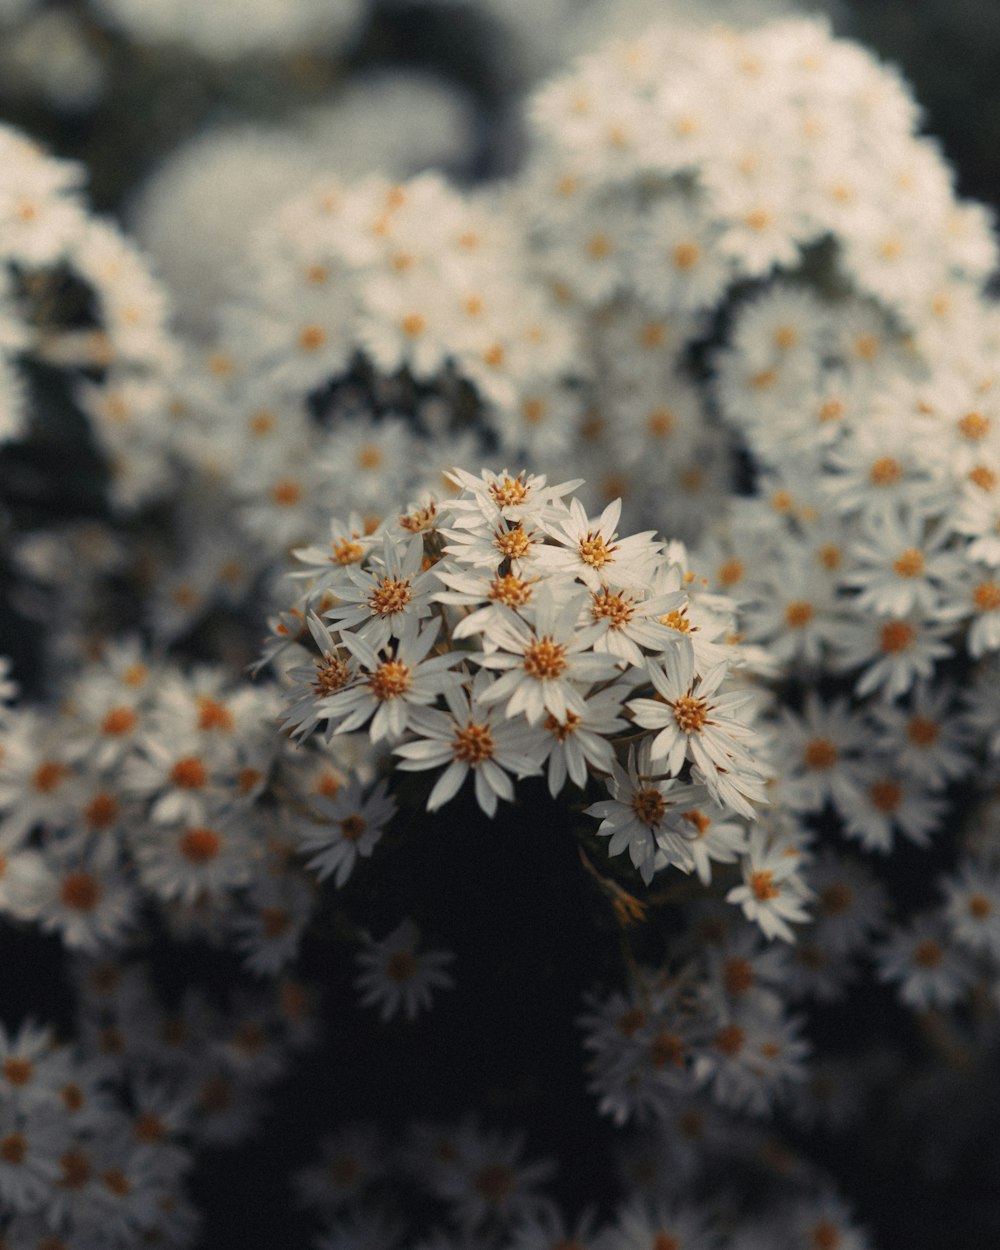 a bunch of white flowers with orange centers